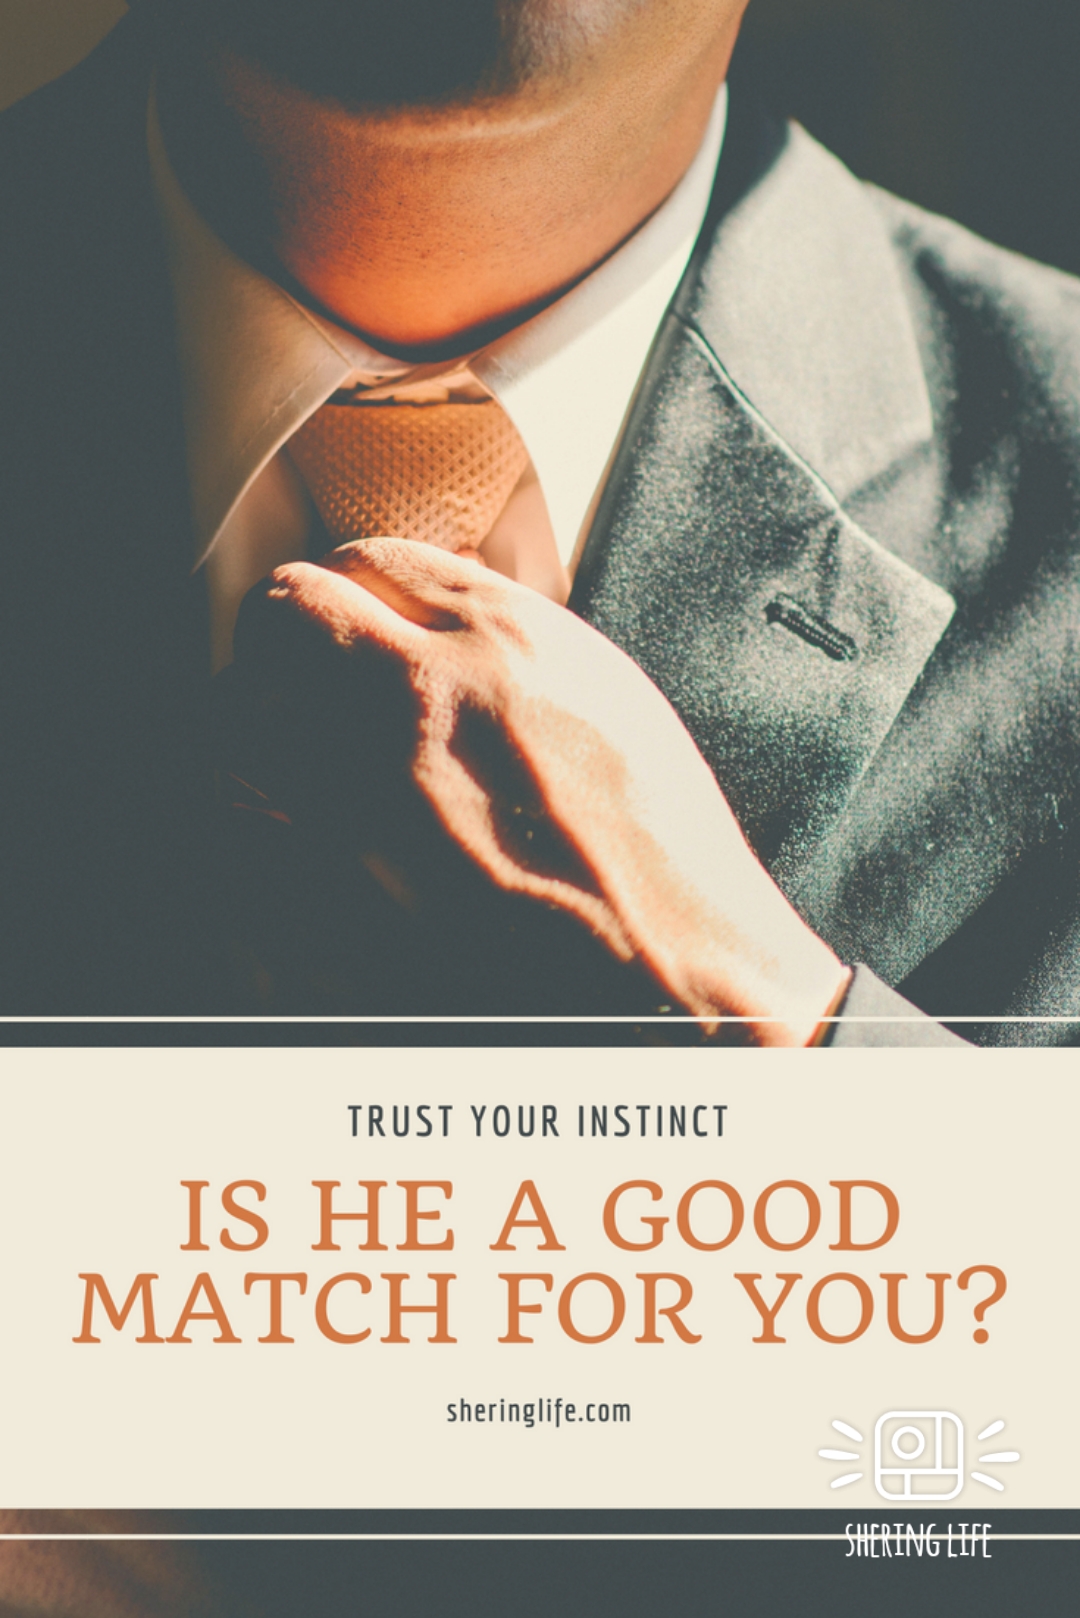 5 Ways To Tell If He Is A Good Match